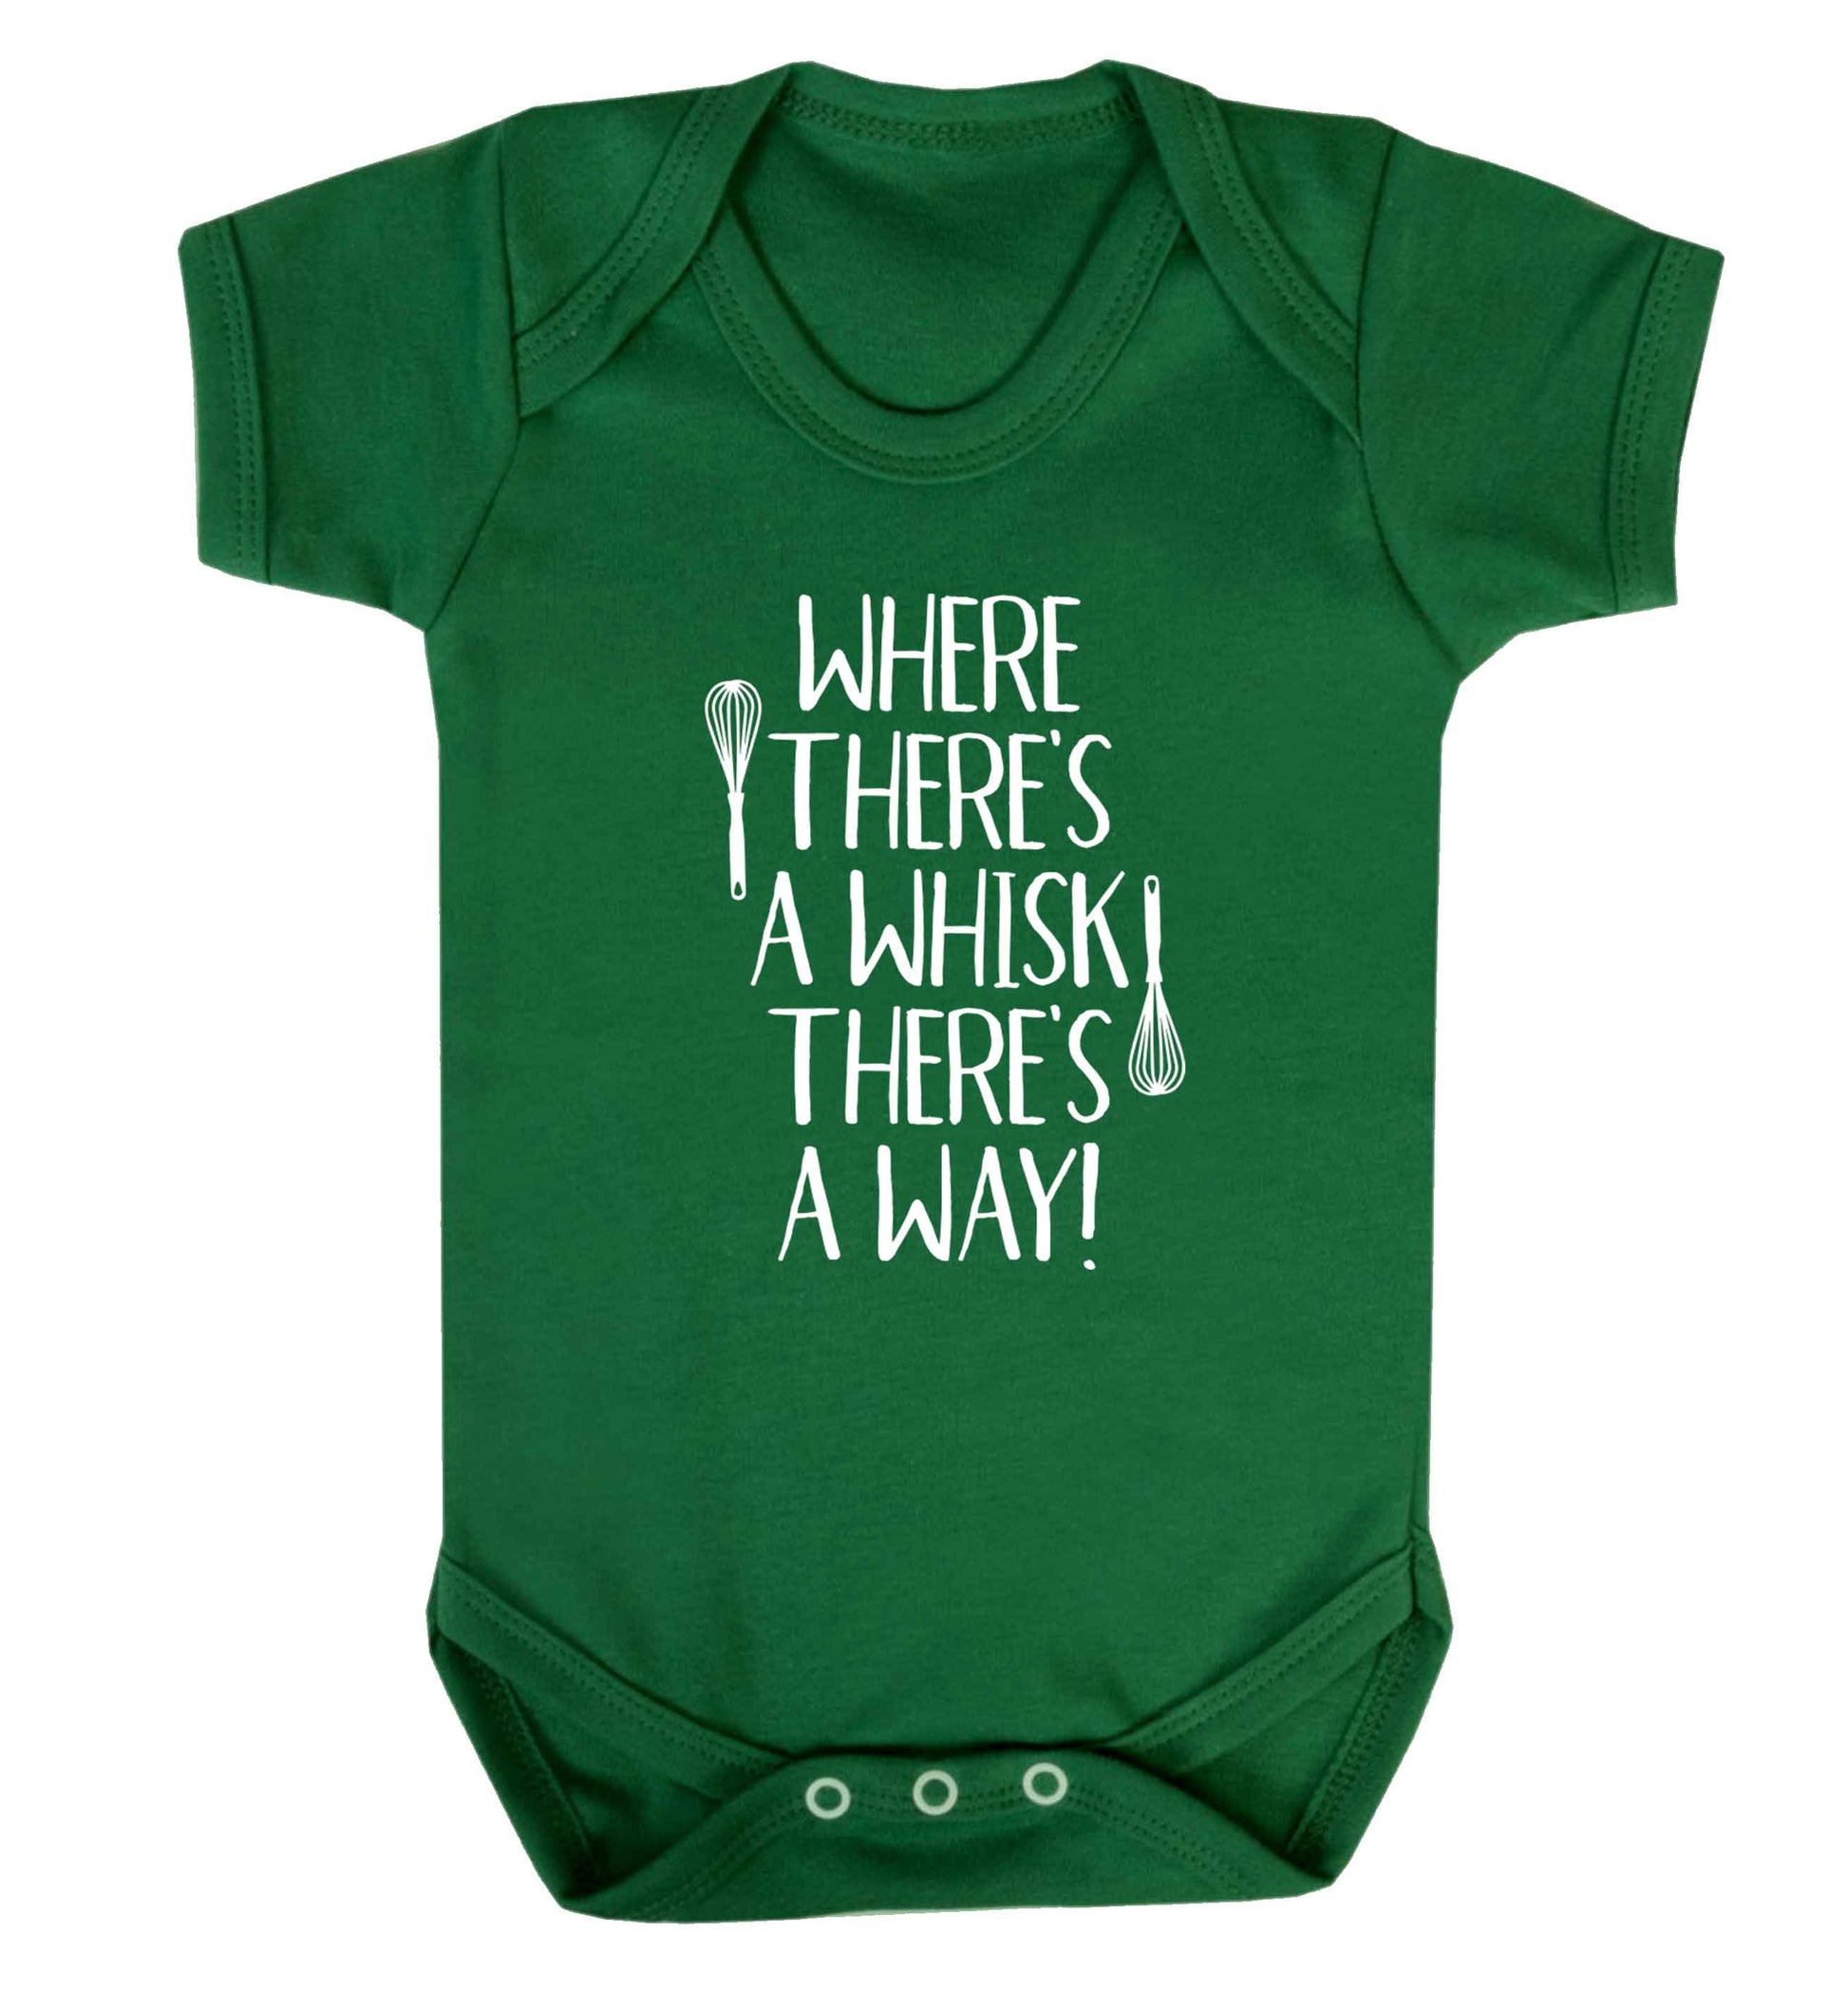 Where there's a whisk there's a way Baby Vest green 18-24 months